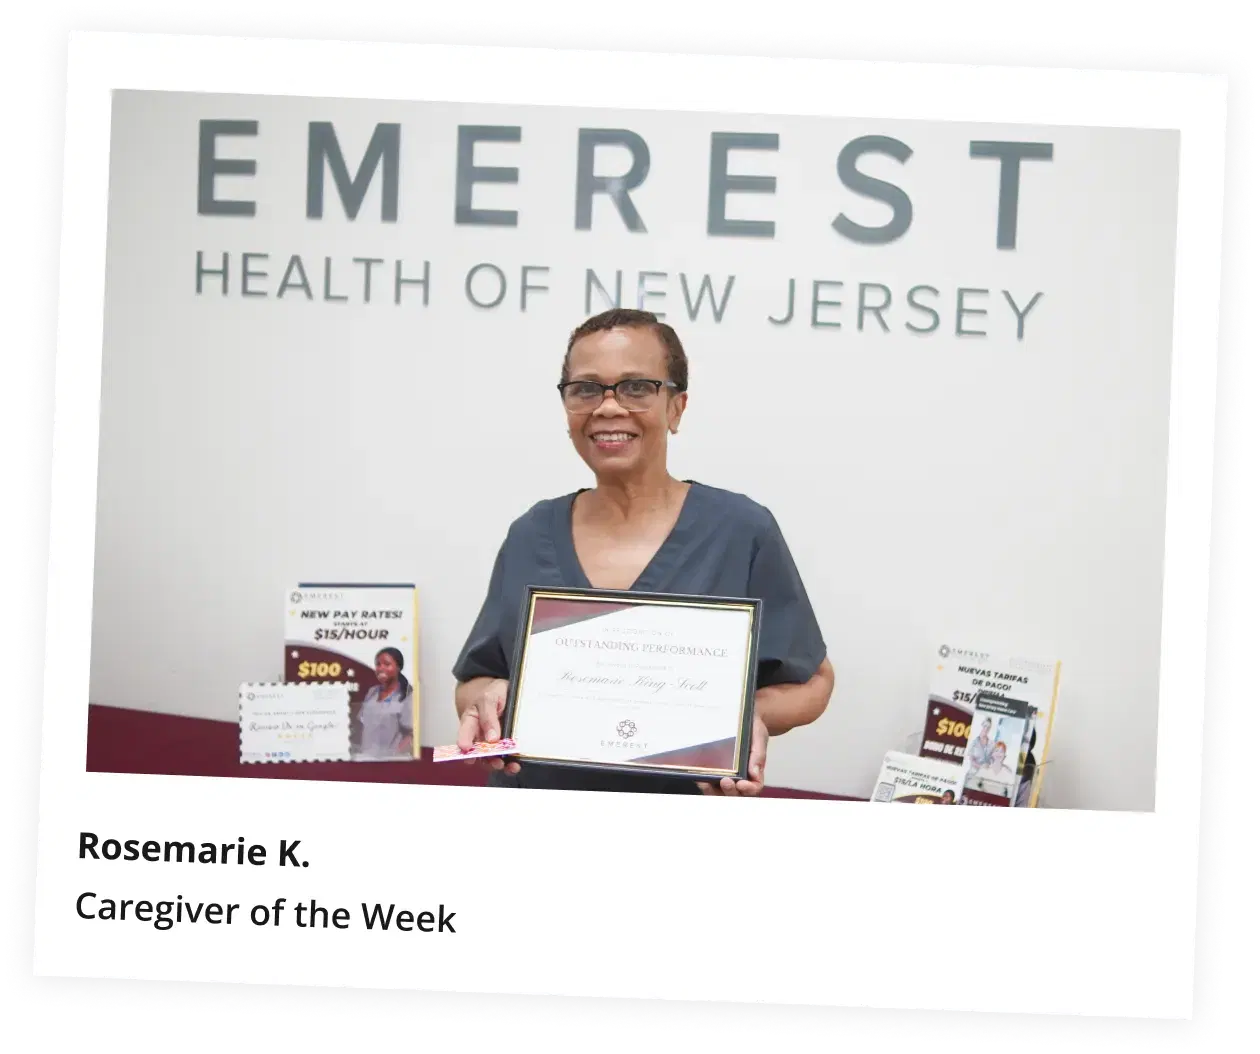 caregiver of the month